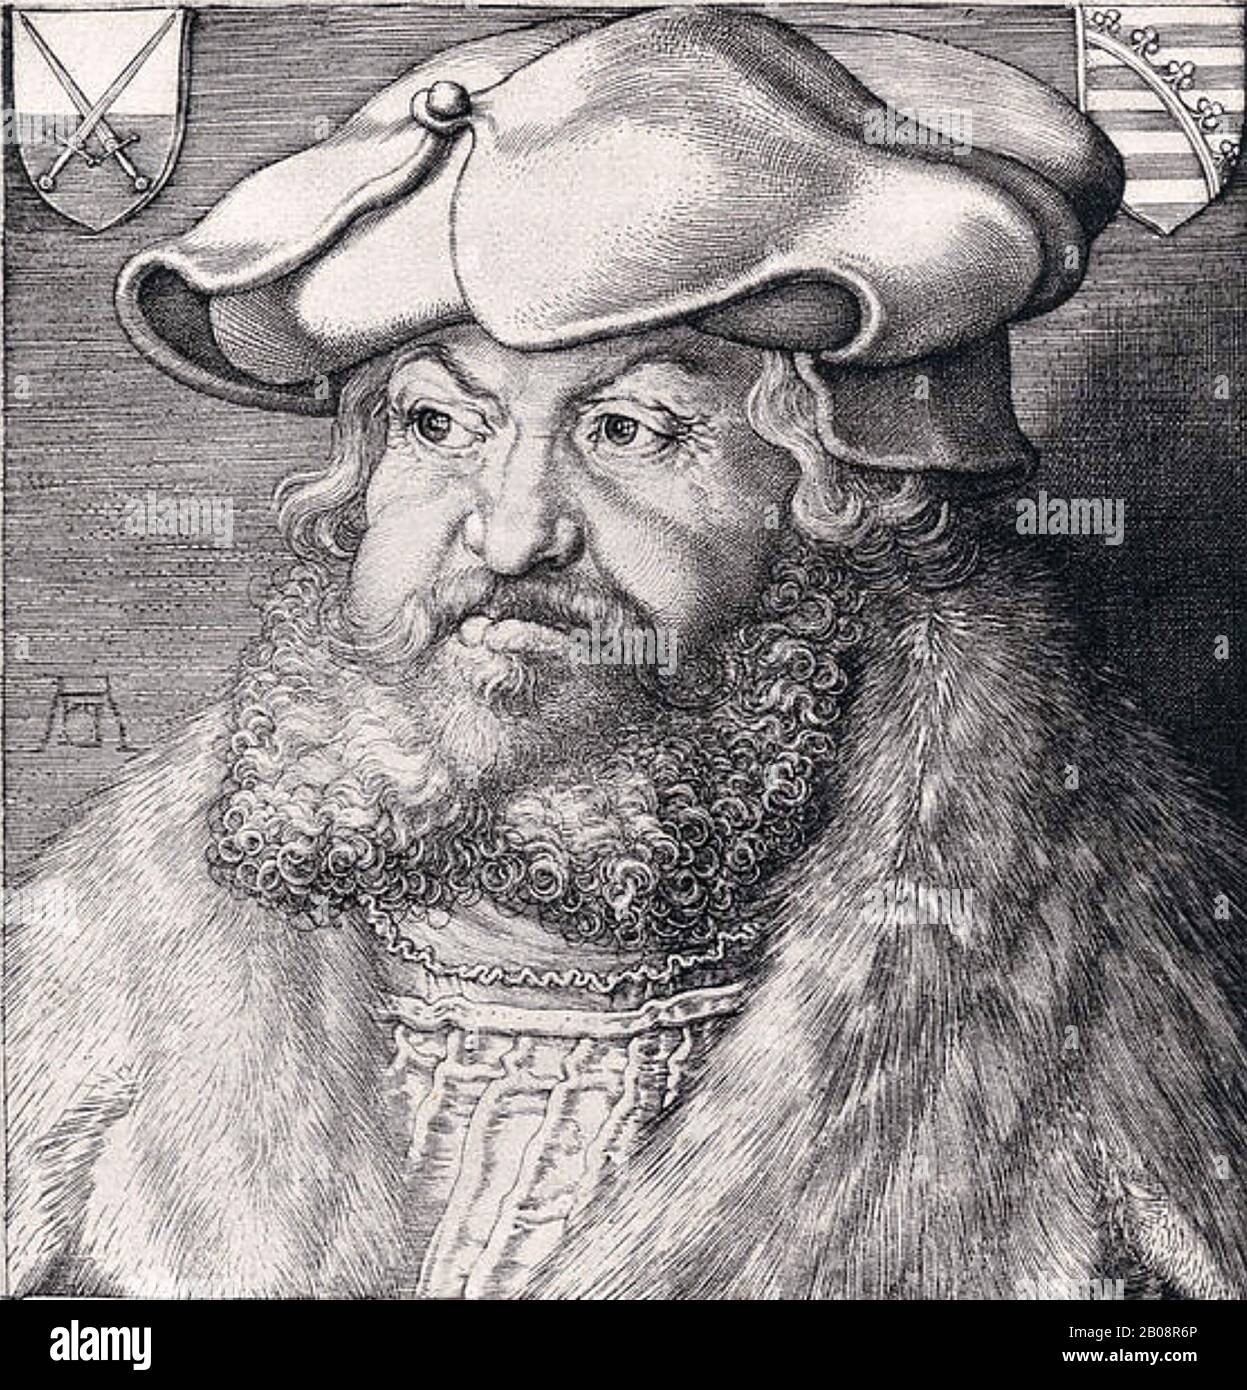 FREDERICK III, Elector of Saxony (1463-1525) also known as Frederick the Wise and protector of Martin Luther. Stock Photo